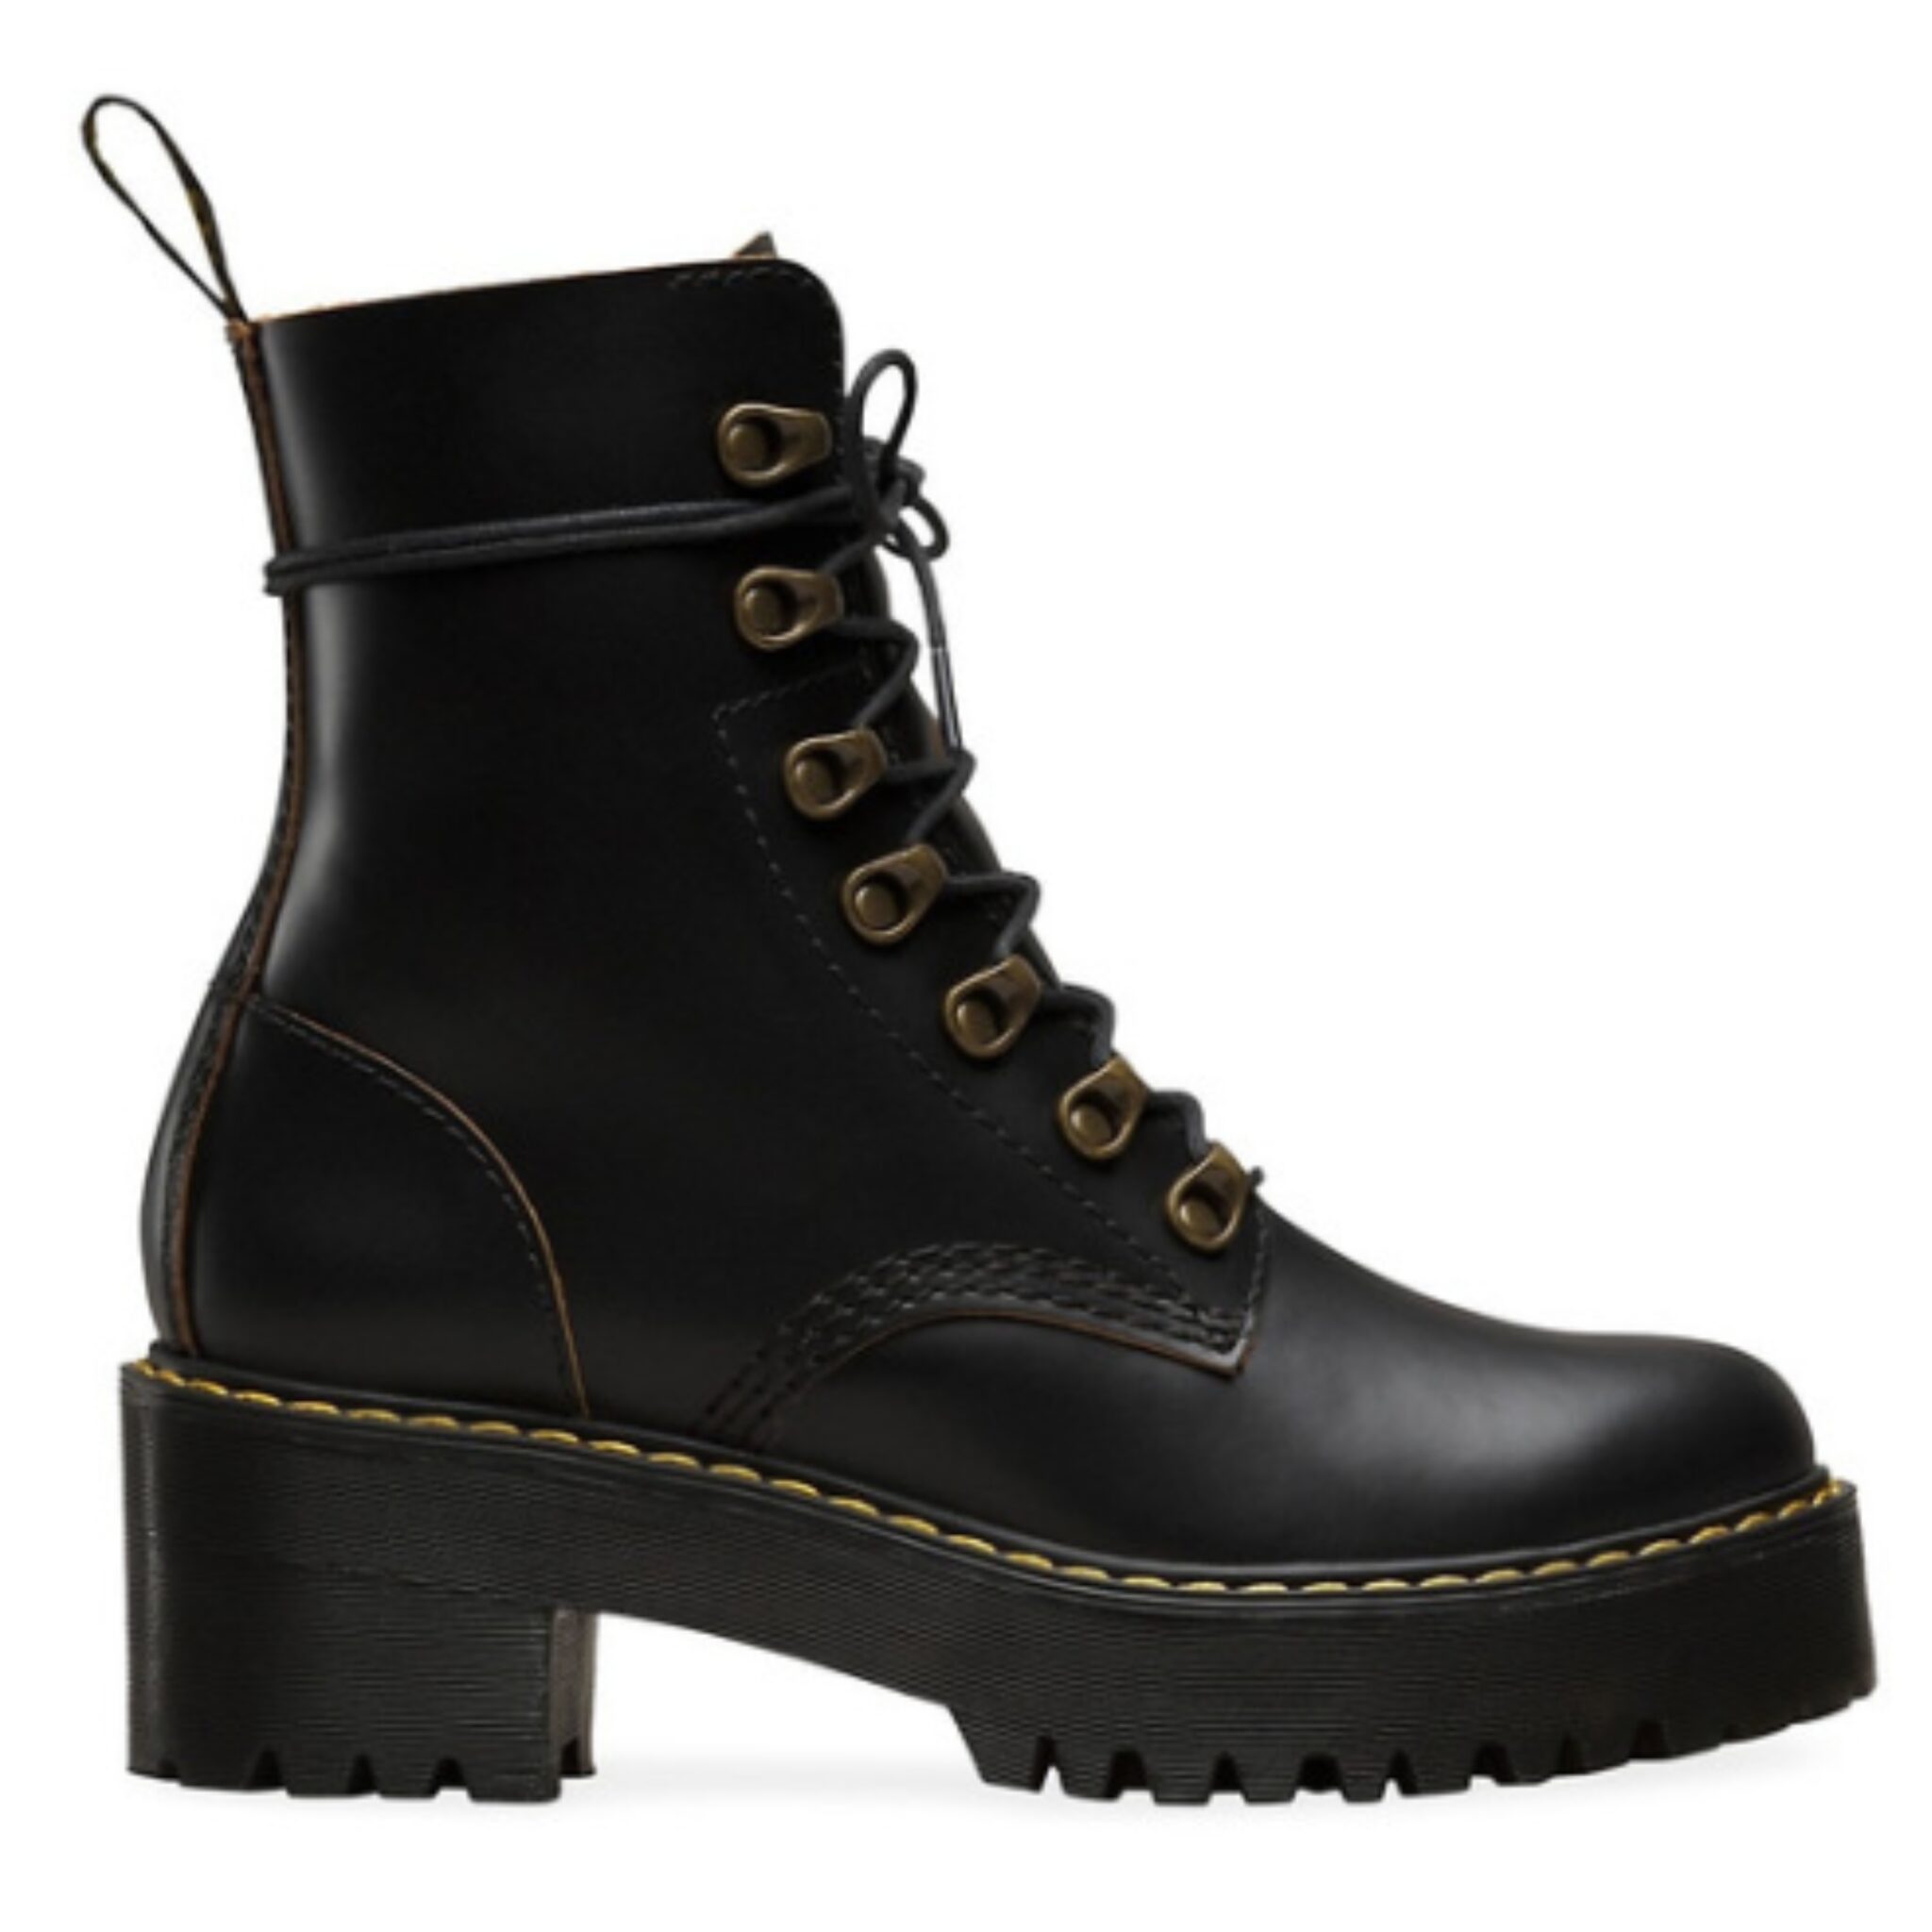 Combat boots to wear with leather leggings.